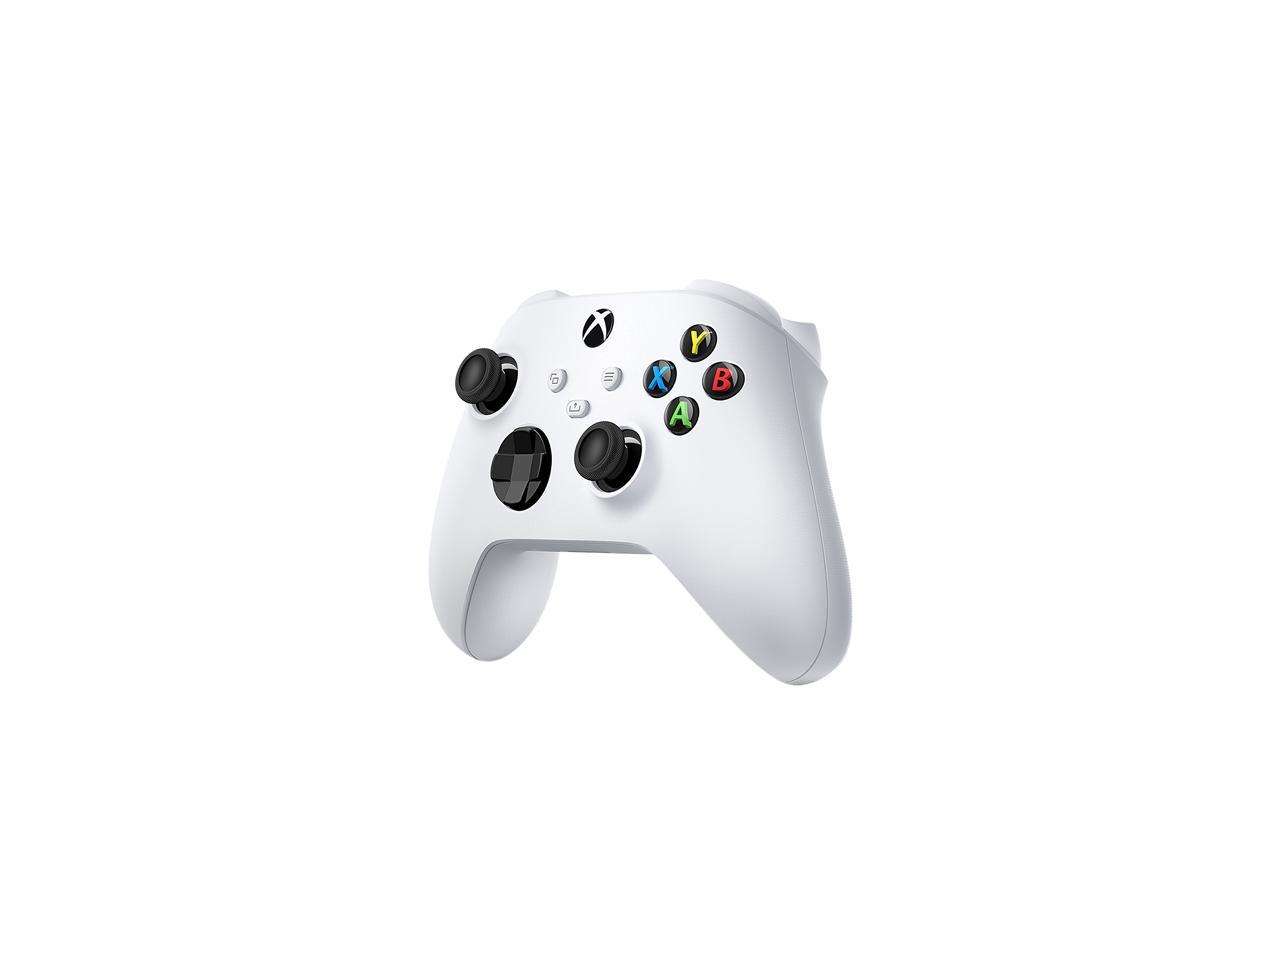 update driver for a xbox one liquid metal controller